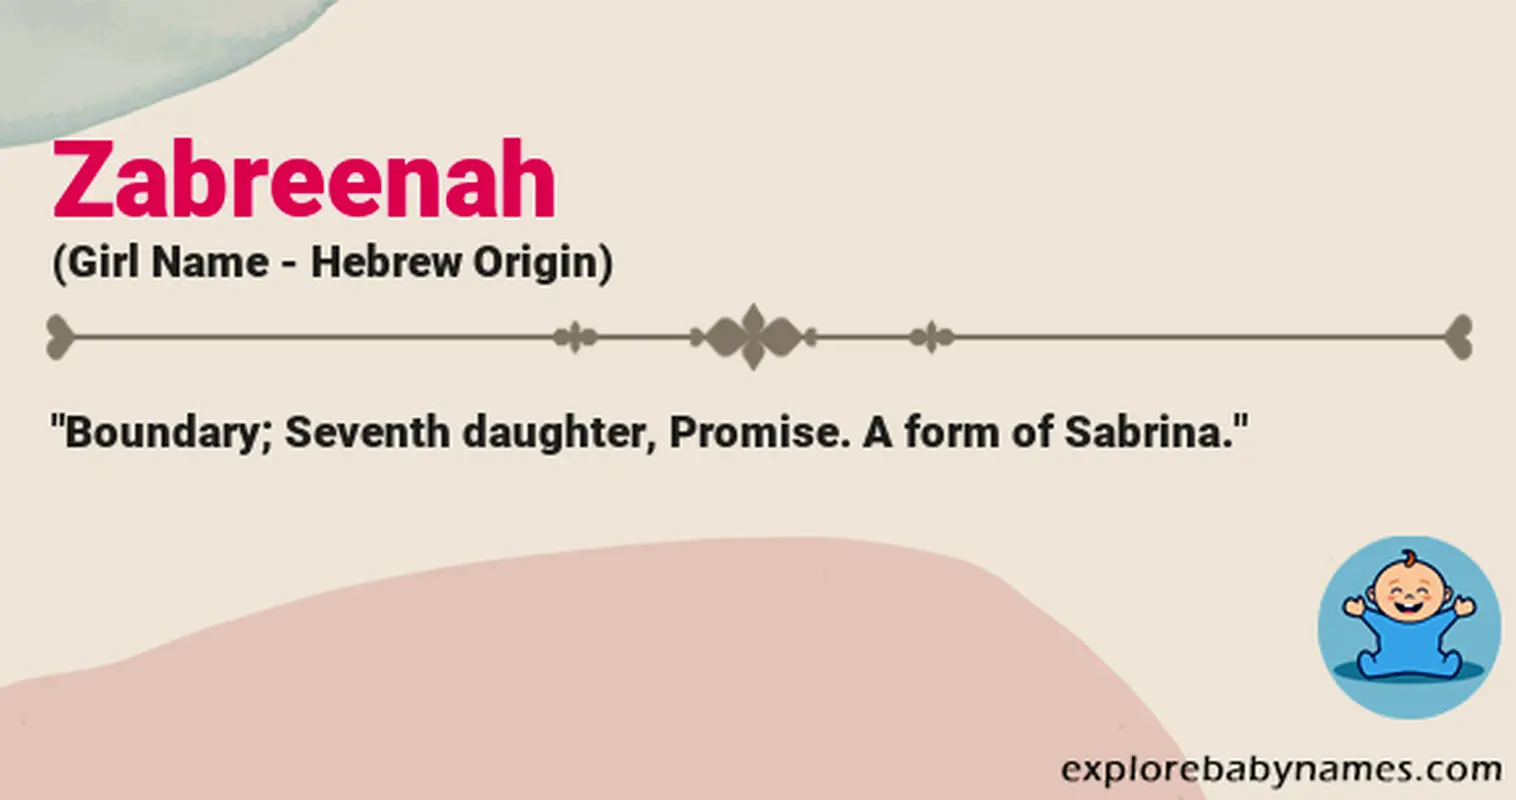 Meaning of Zabreenah